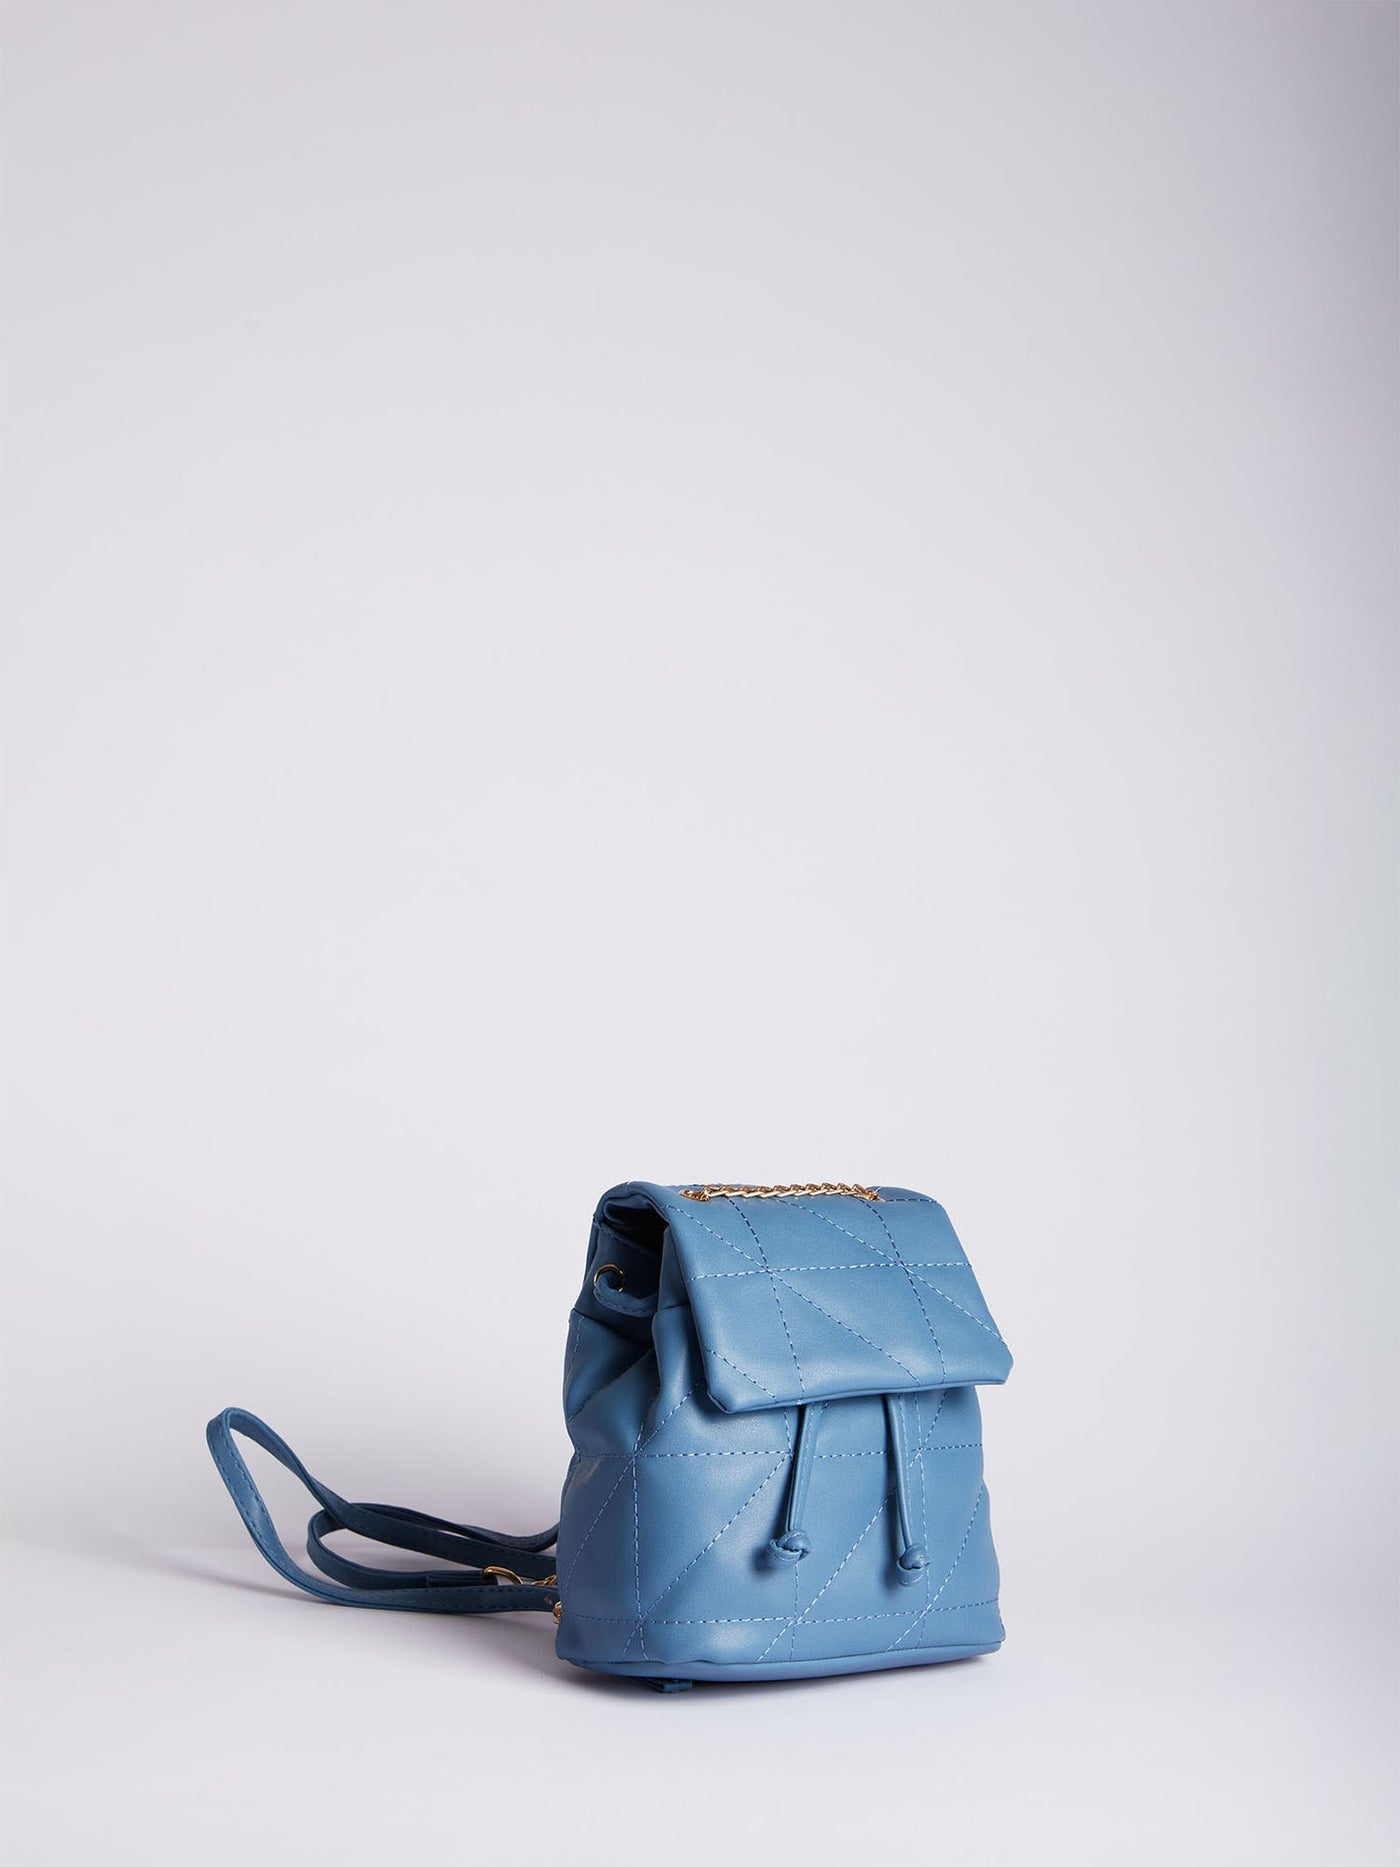 Backpack - Small